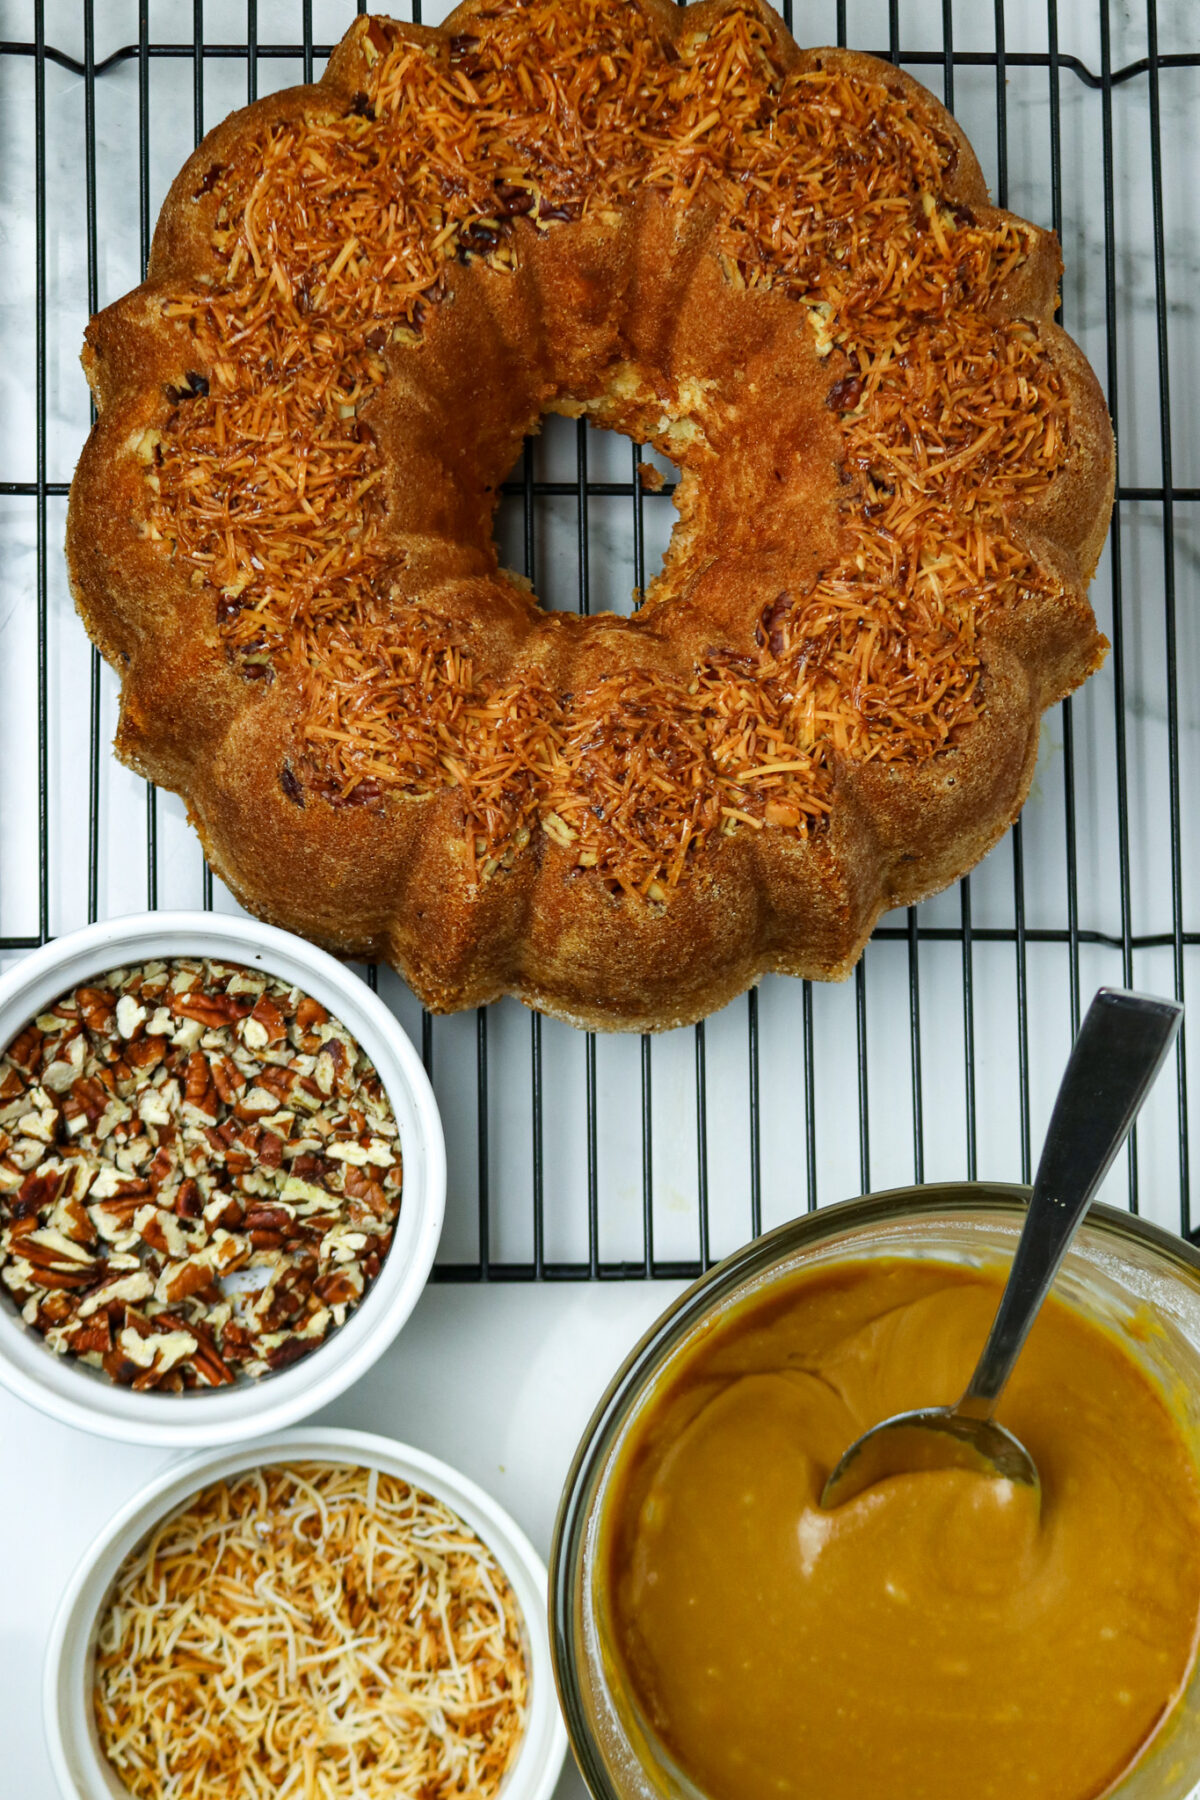 A bundt cake with a bowl of pecans and a bowl of glaze next to it.